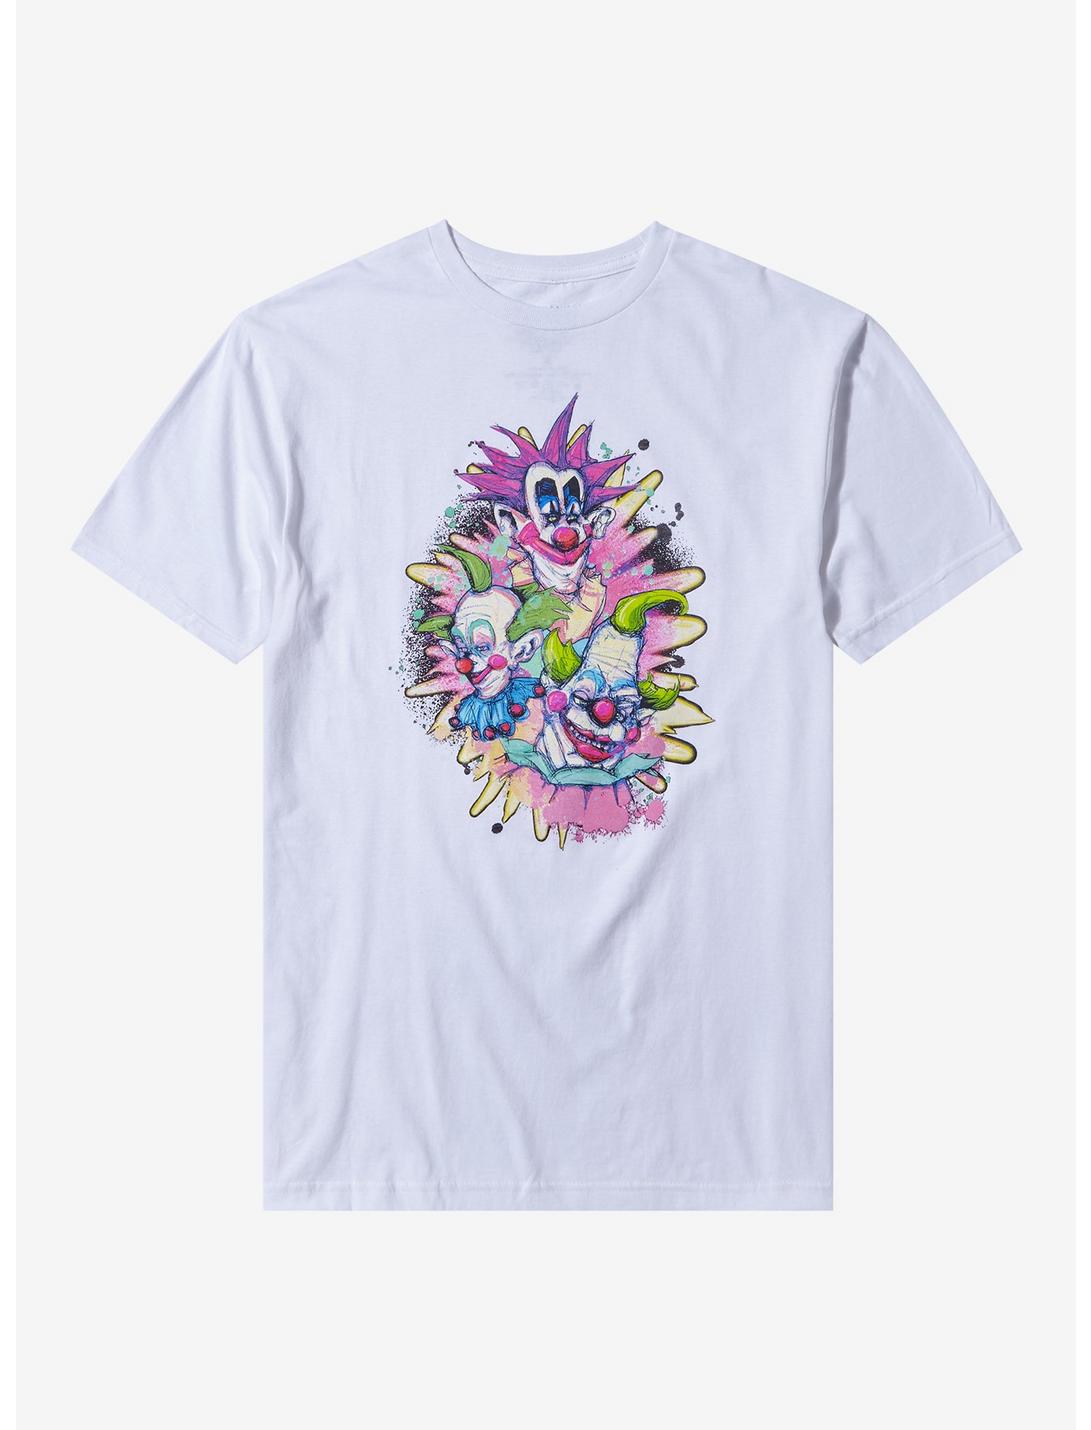 Killer Klowns From Outer Space Sketched Characters T-Shirt, MULTI, hi-res